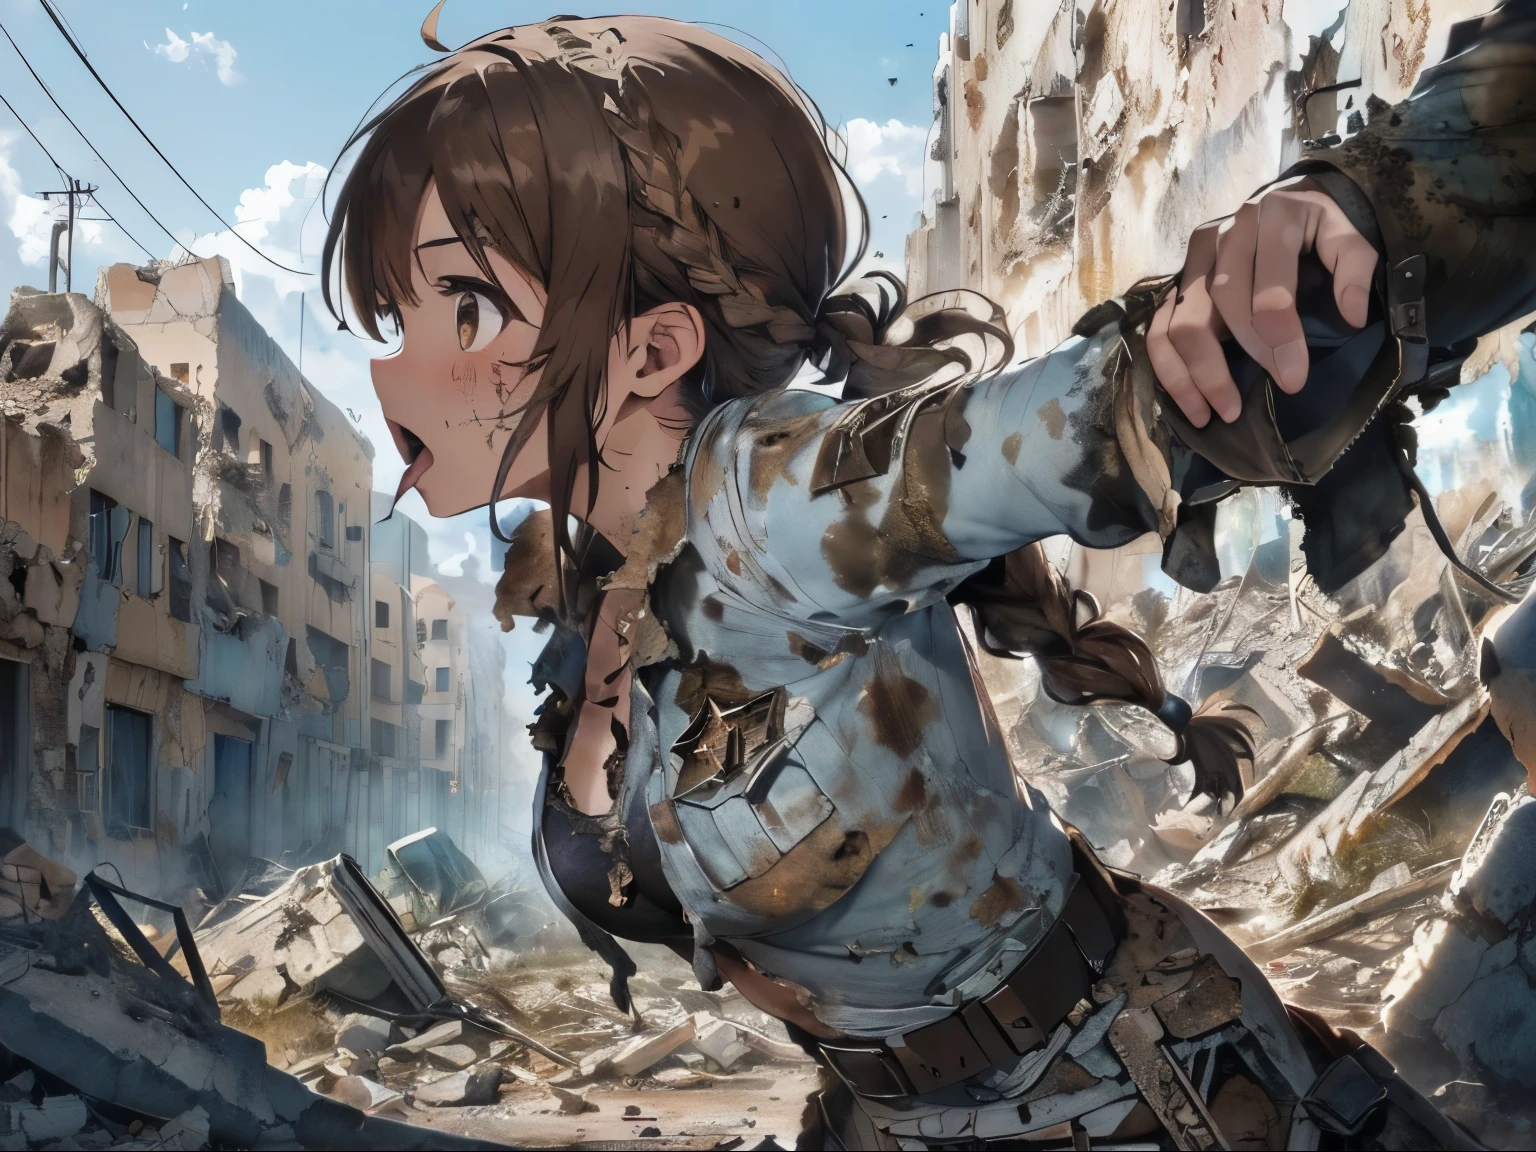 ((A ruined city full of rubble)),(After the war),((Vast landscape full of rubble)),(wearing tattered slave-like clothes),((Brown Hair)),(Braided Short Hair),((Brown eyes)),((profile)),((Horizontal line of sight)),(Surprised face),((Surprise Mark)),((Amazing)),((I opened my mouth wide in surprise.)),((Surrounded by several men)),(((being attacked by someone&#39;being grabbed by the arm or hair)))